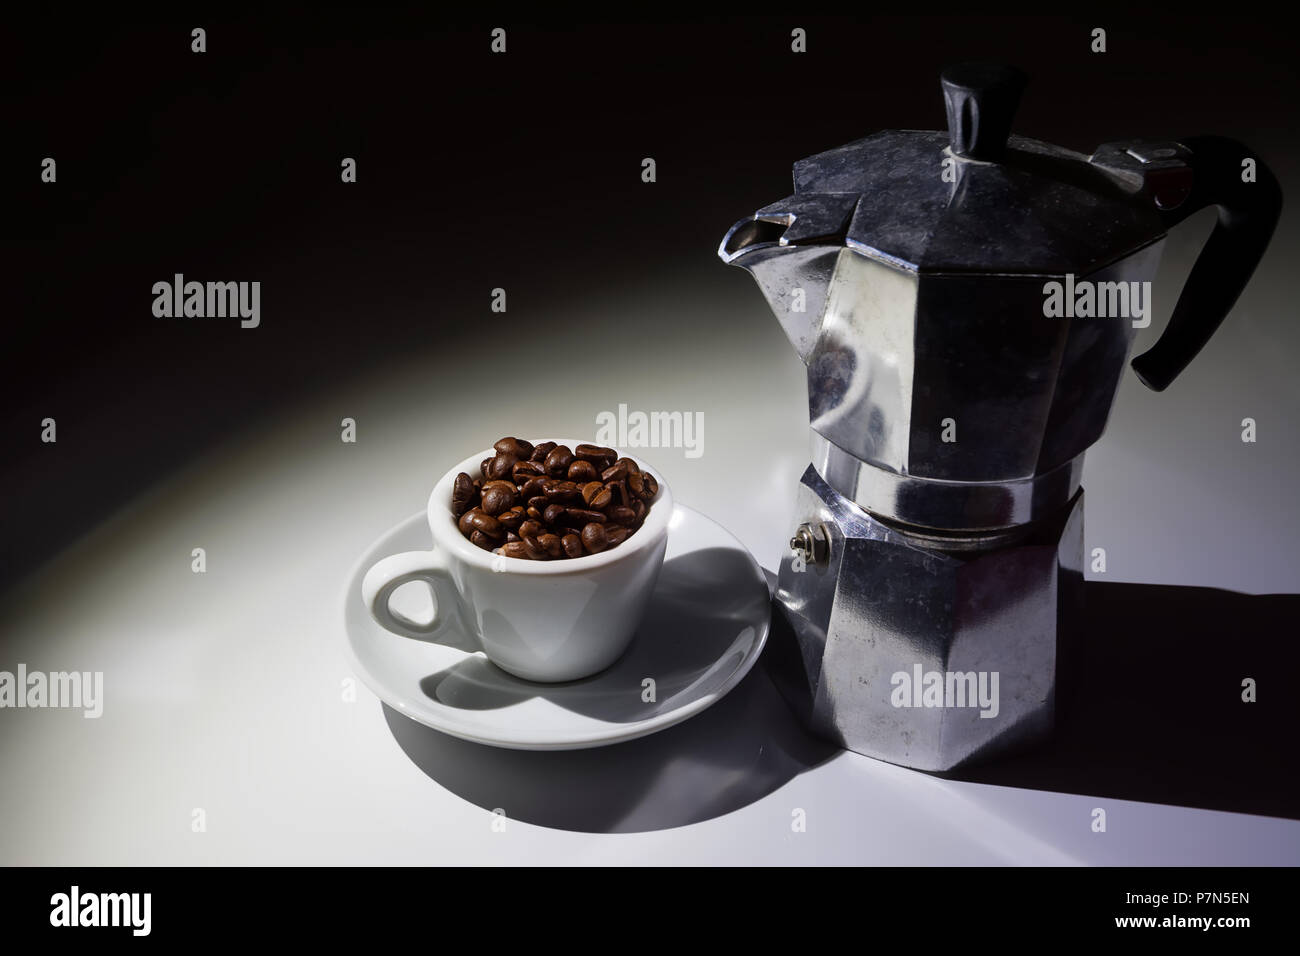 coffee cup full of roasted coffee beans and moka coffee pot Stock Photo